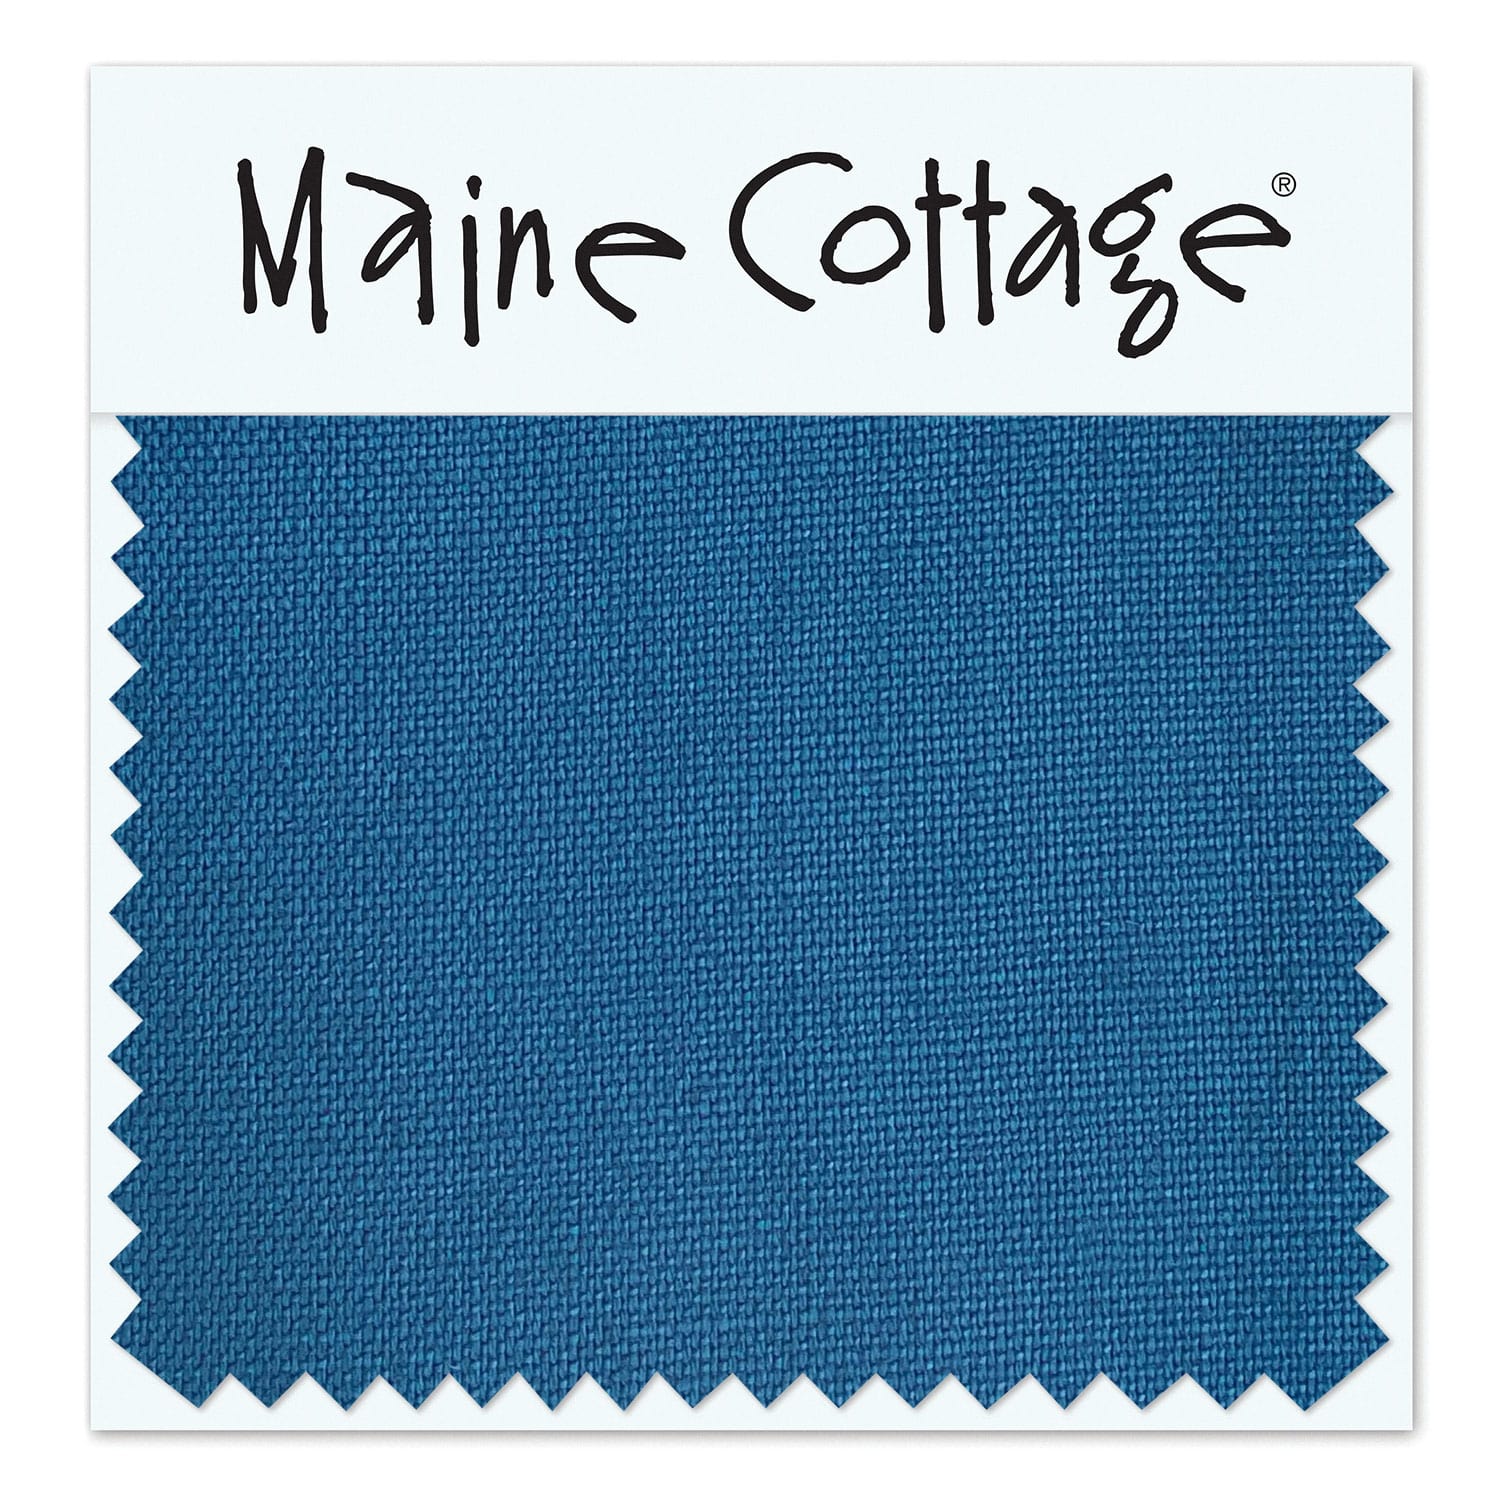 Maine Cottage Beach House Linen: Peacock Fabric Sample | Maine Cottage® 